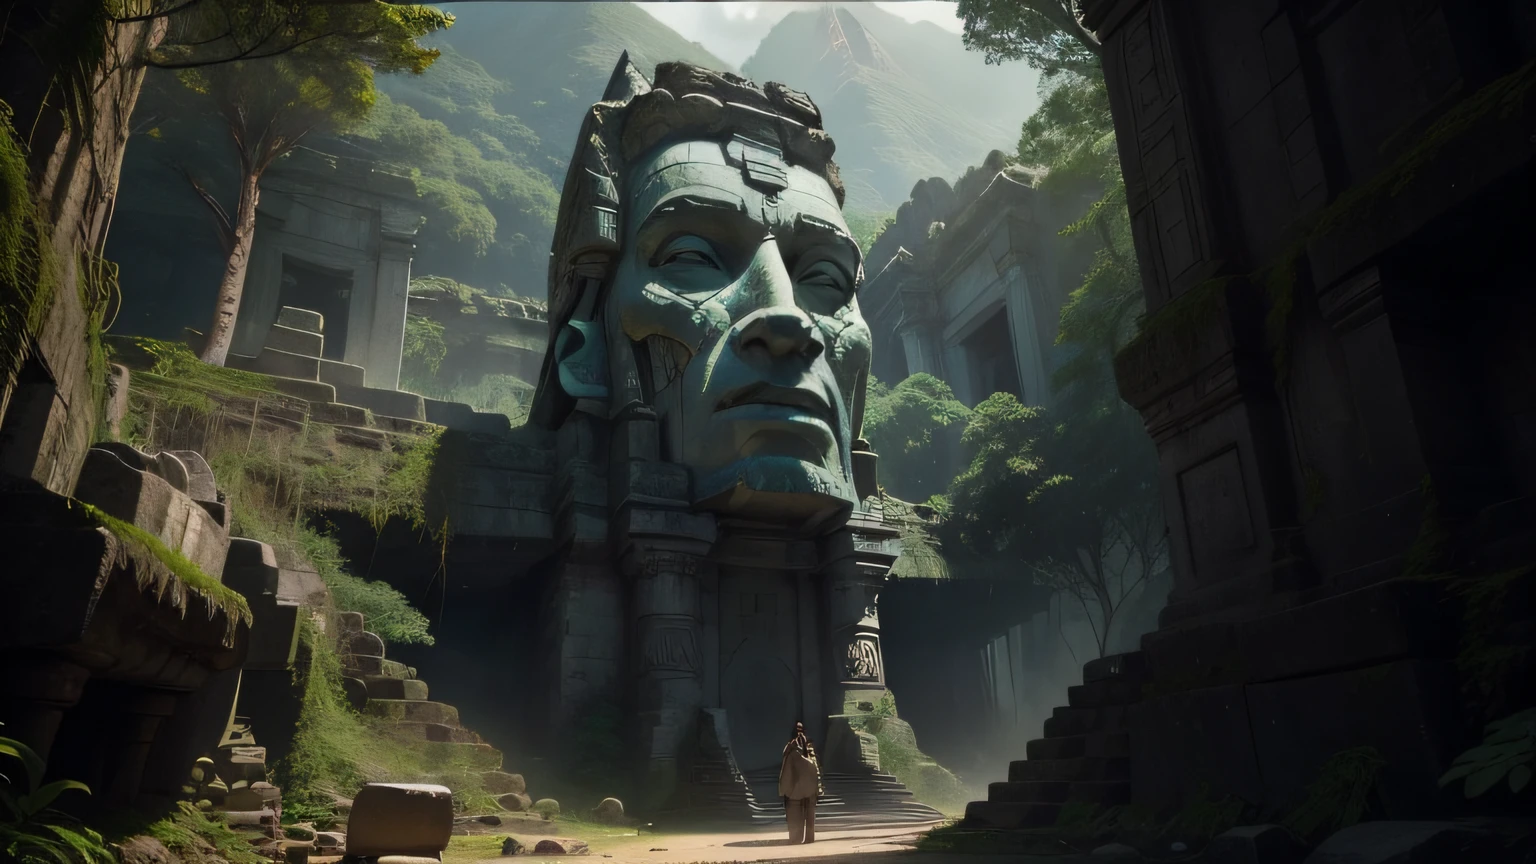 there is a statue in the middle of a forest with a mountain in the background, unreal maya, promotional movie still, widescreen shot, imax close-up of face, white stone temple ruins, airborn studios, overgrown jungle ruins, moai, face shown, game screen